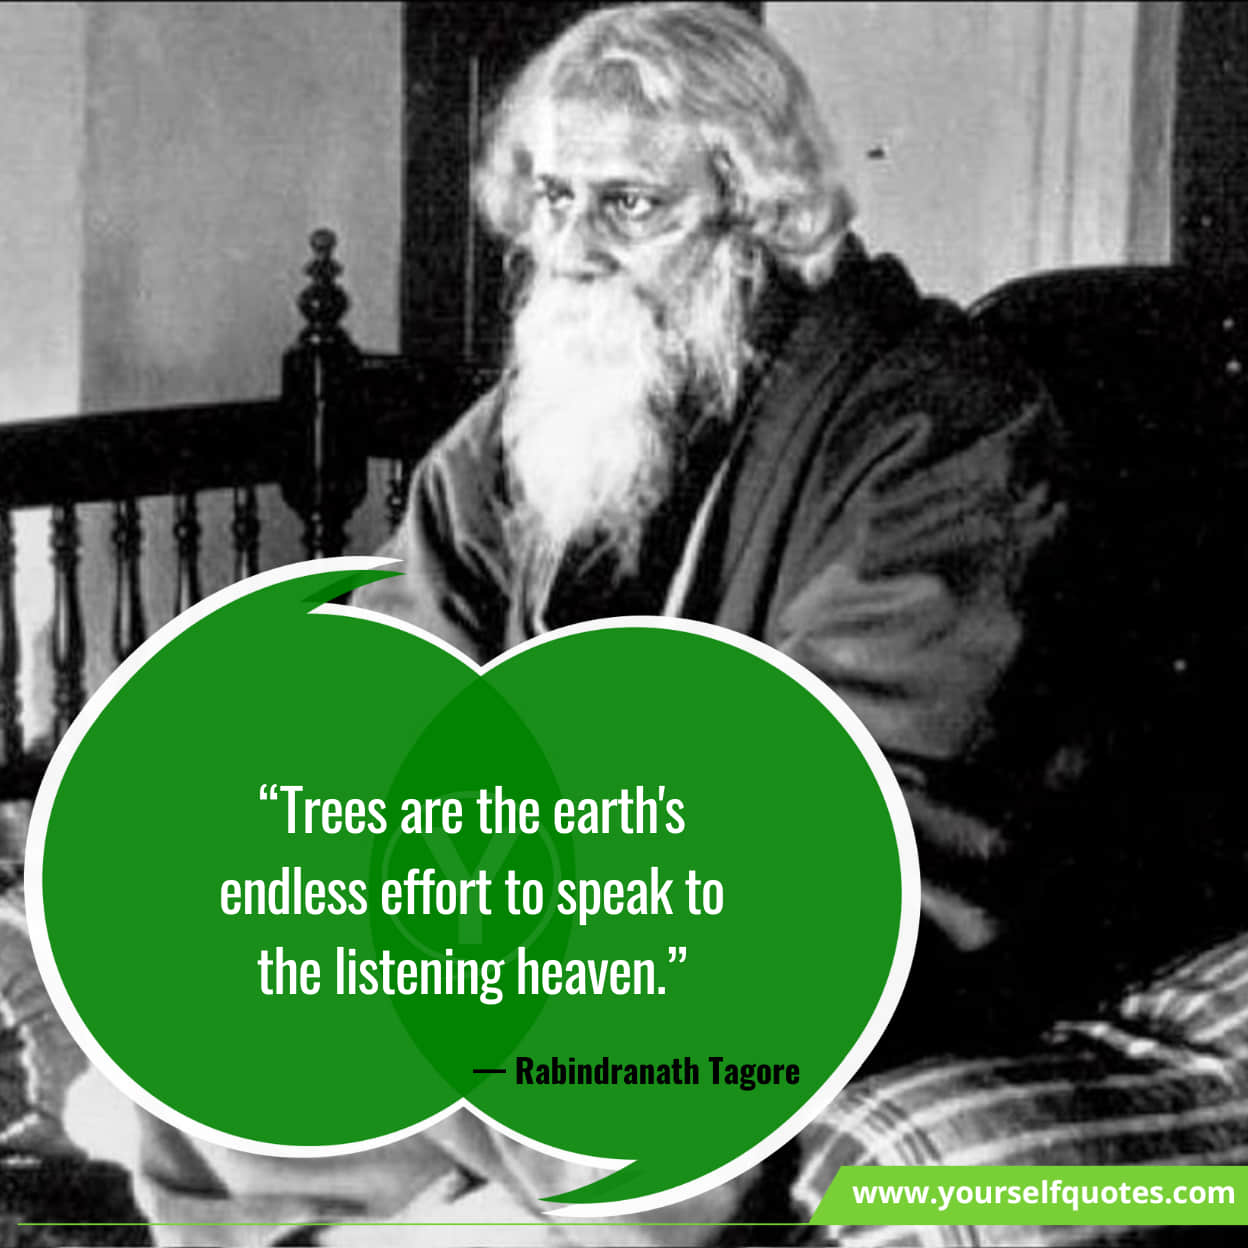 Wisdom quotes from Rabindranath Tagore